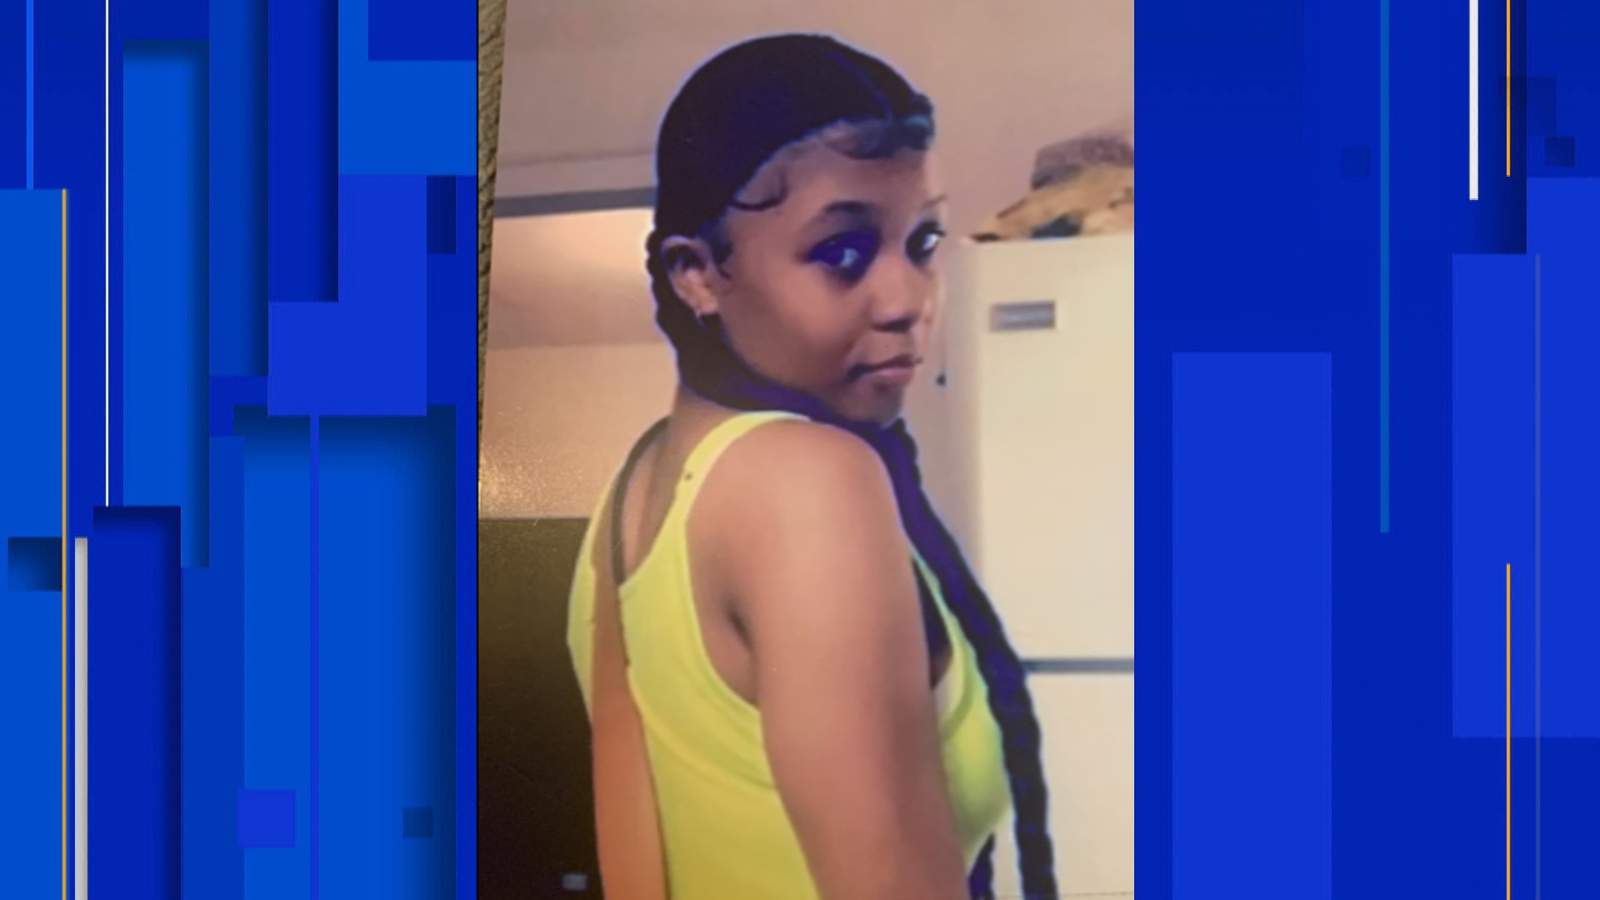 Detroit police looking for missing 13-year-old girl who left home without permission